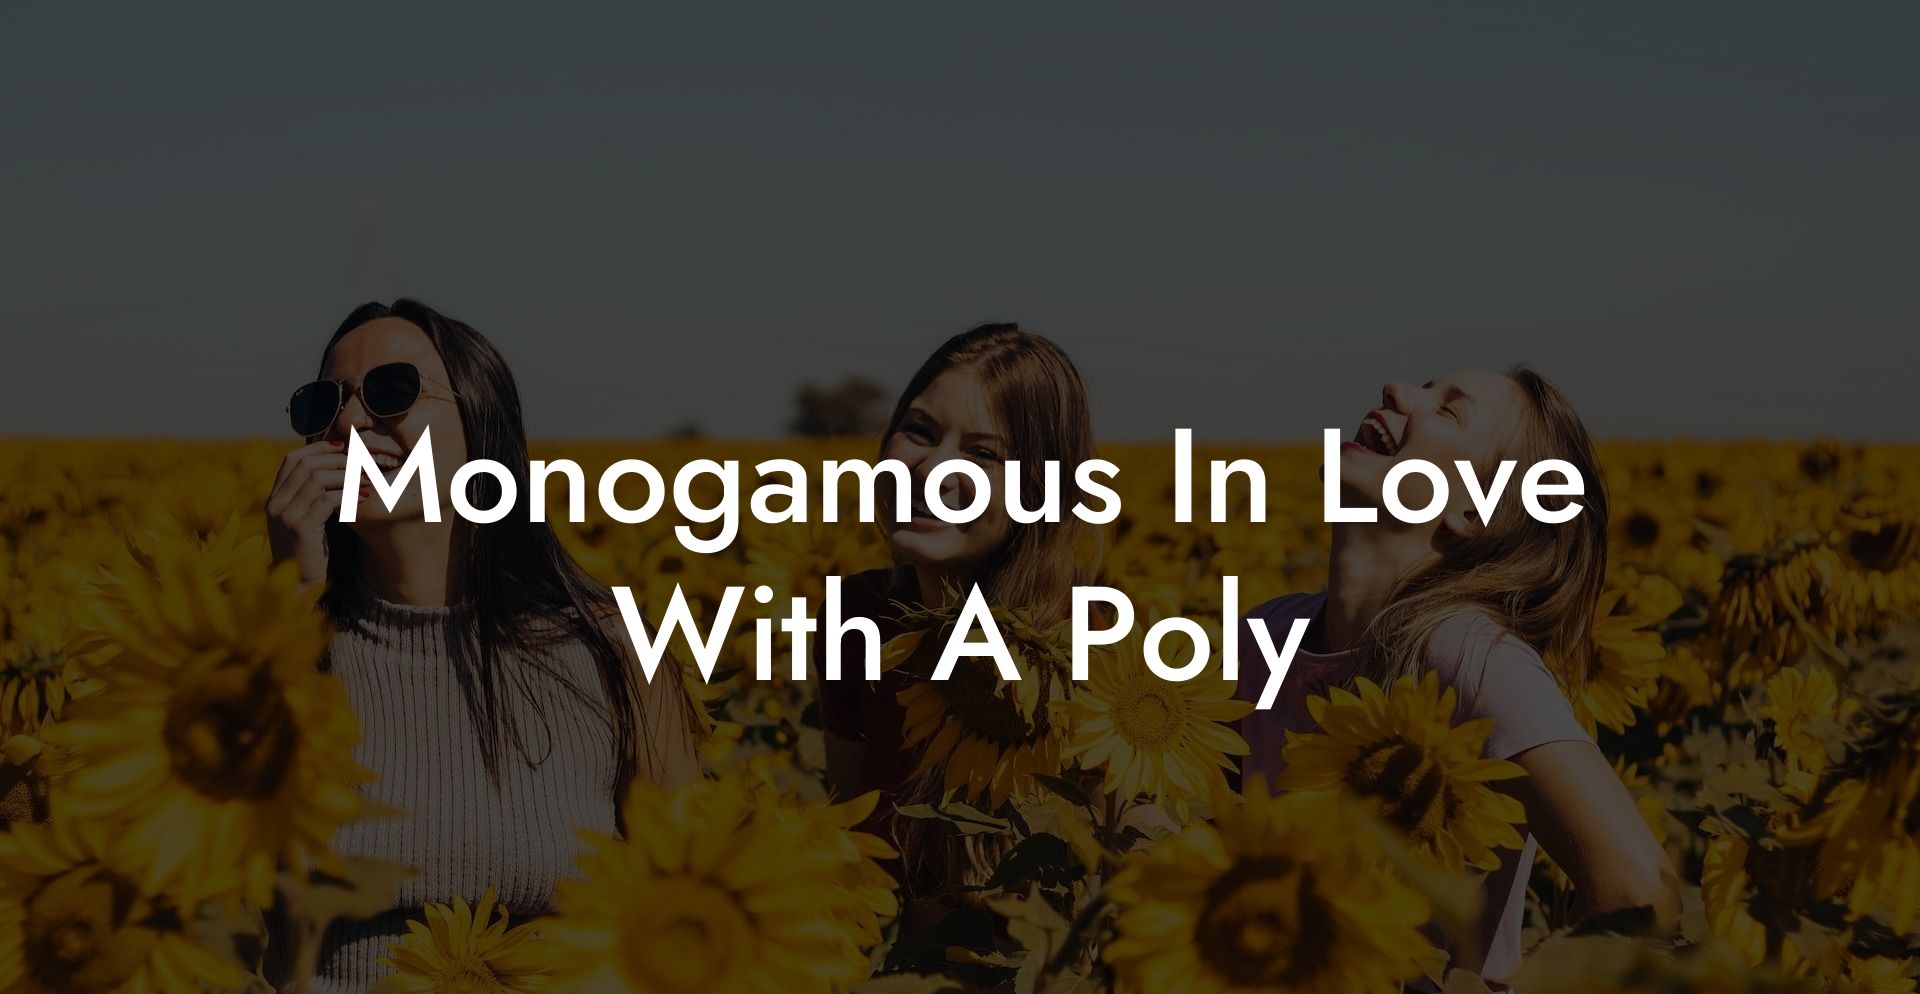 Monogamous In Love With A Poly